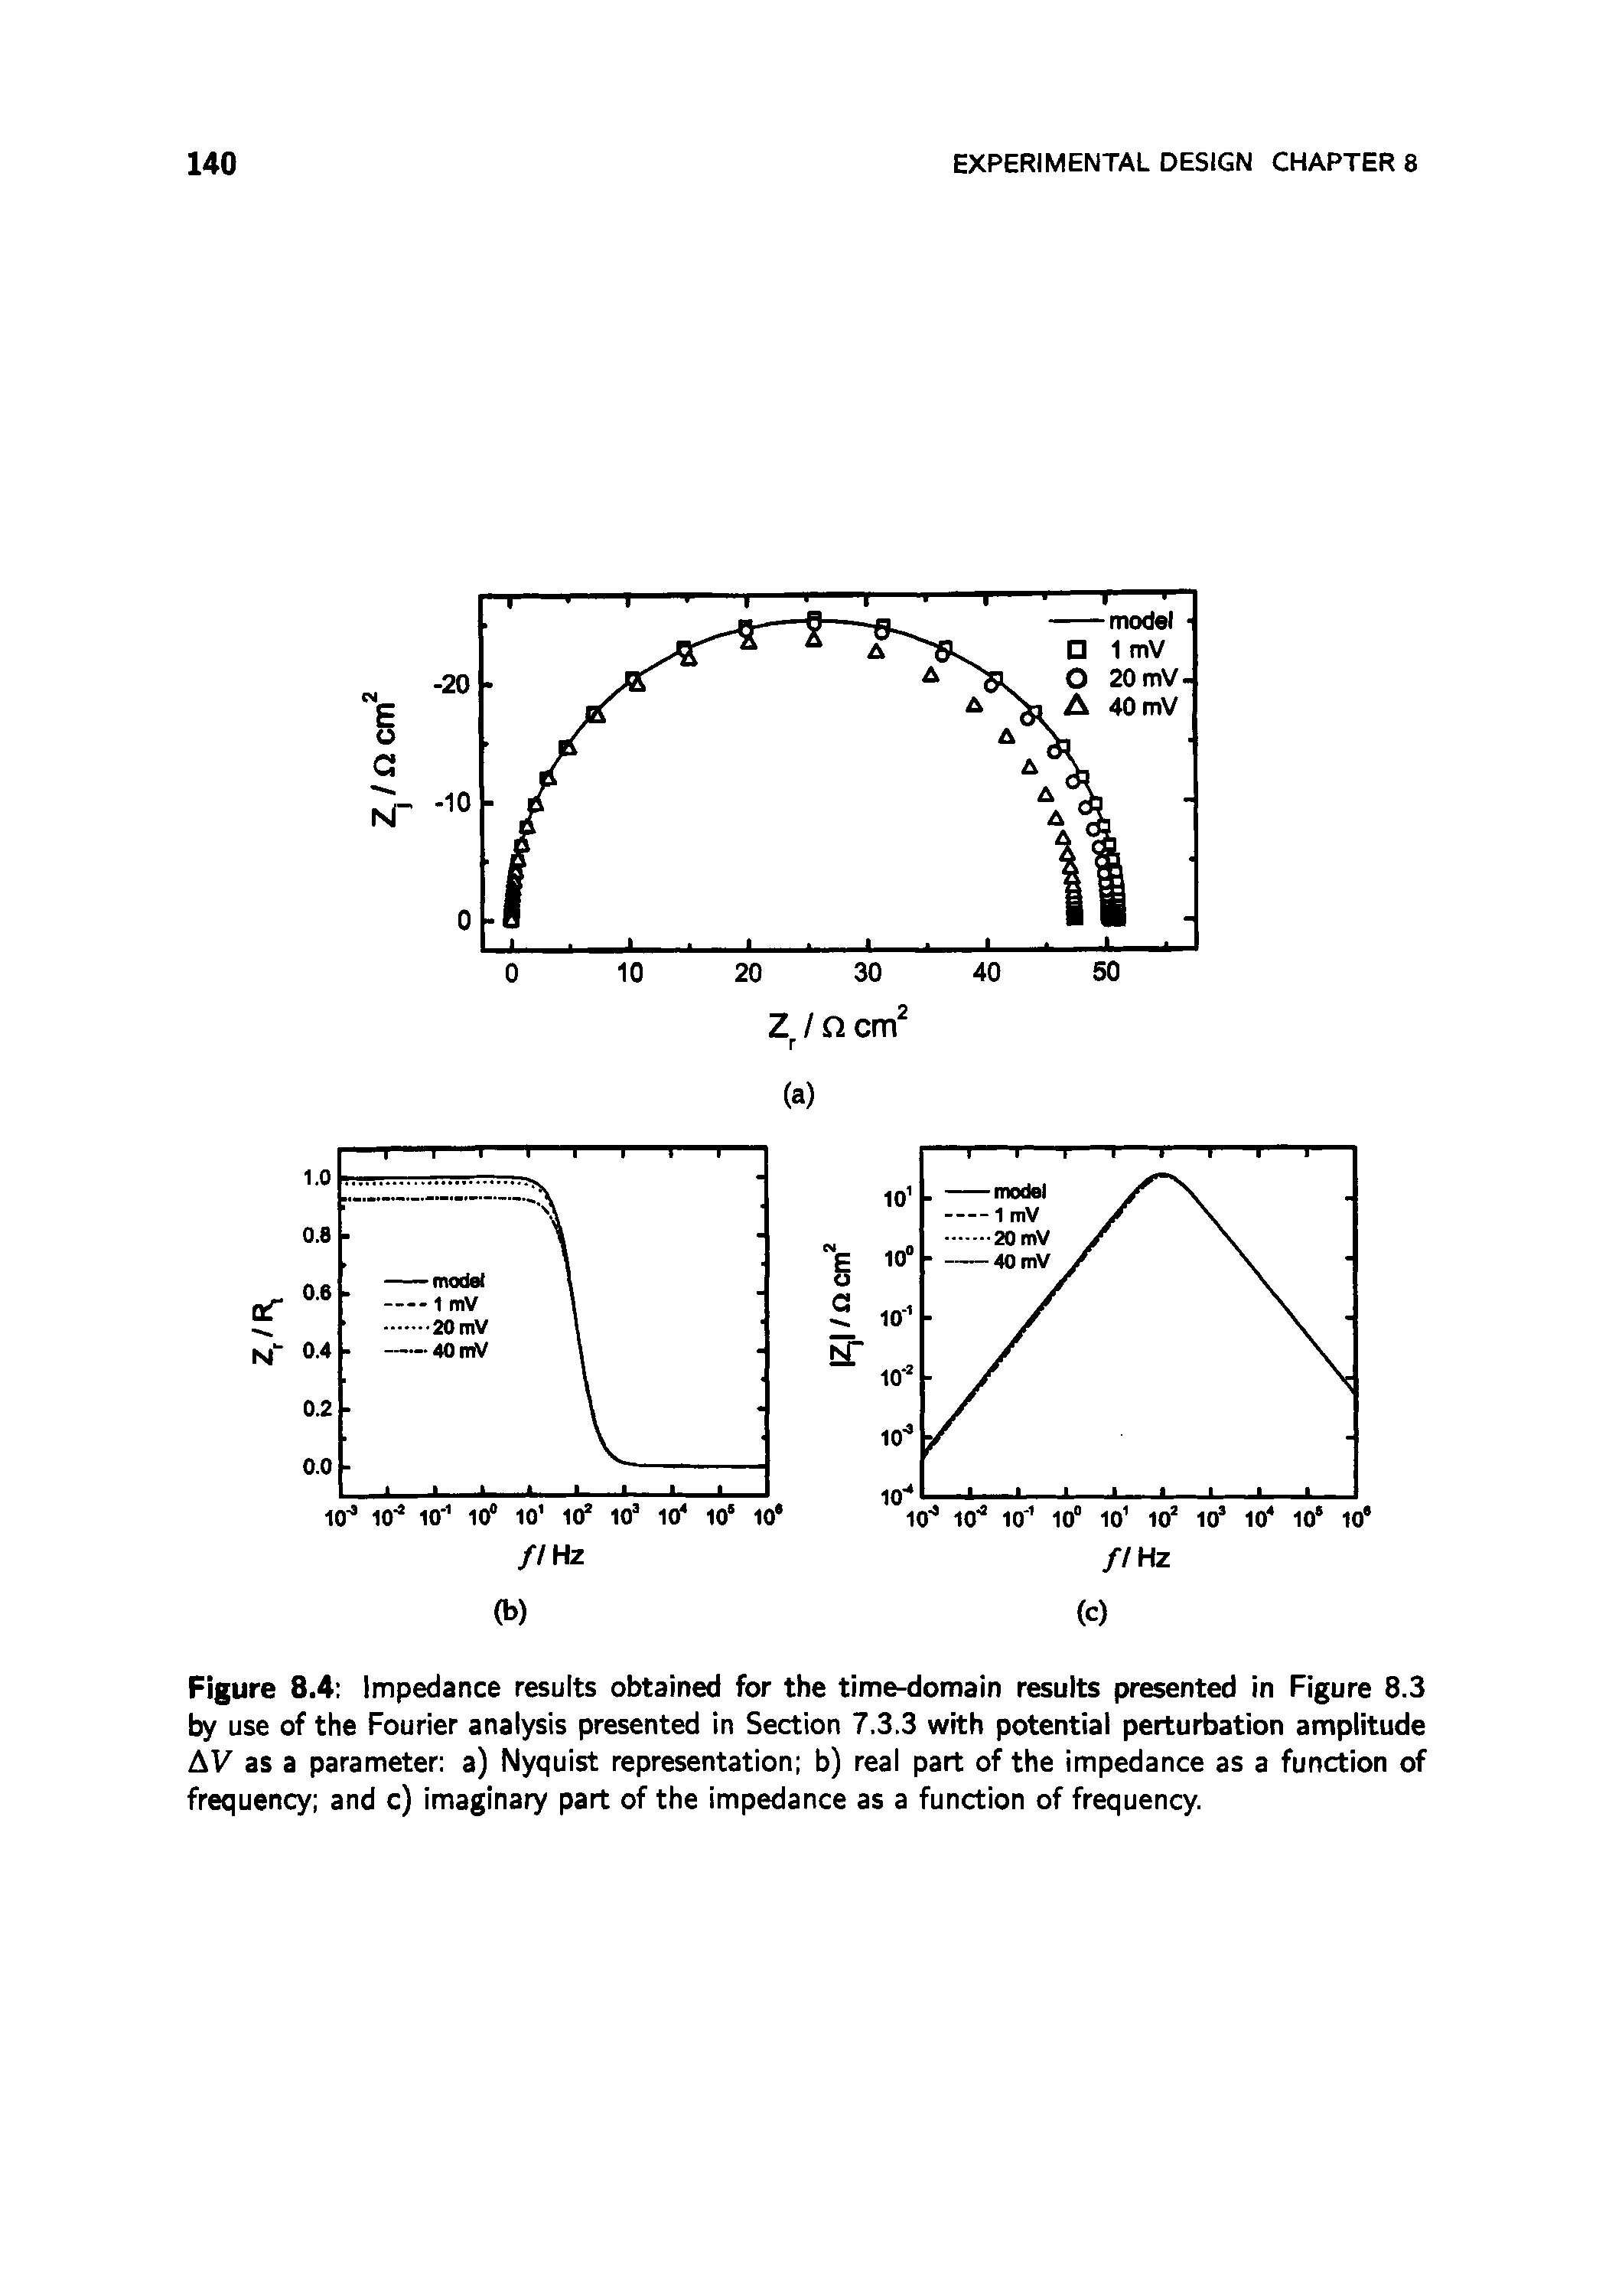 Figure 8.4 Impedance results obtained for the time-domain results presented in Figure 8.3 by use of the Fourier analysis presented in Section 7.3.3 with potential perturbation amplitude AV as a parameter a) Nyquist representation b) real part of the impedance as a function of frequency and c) imaginary part of the impedance as a function of frequency.